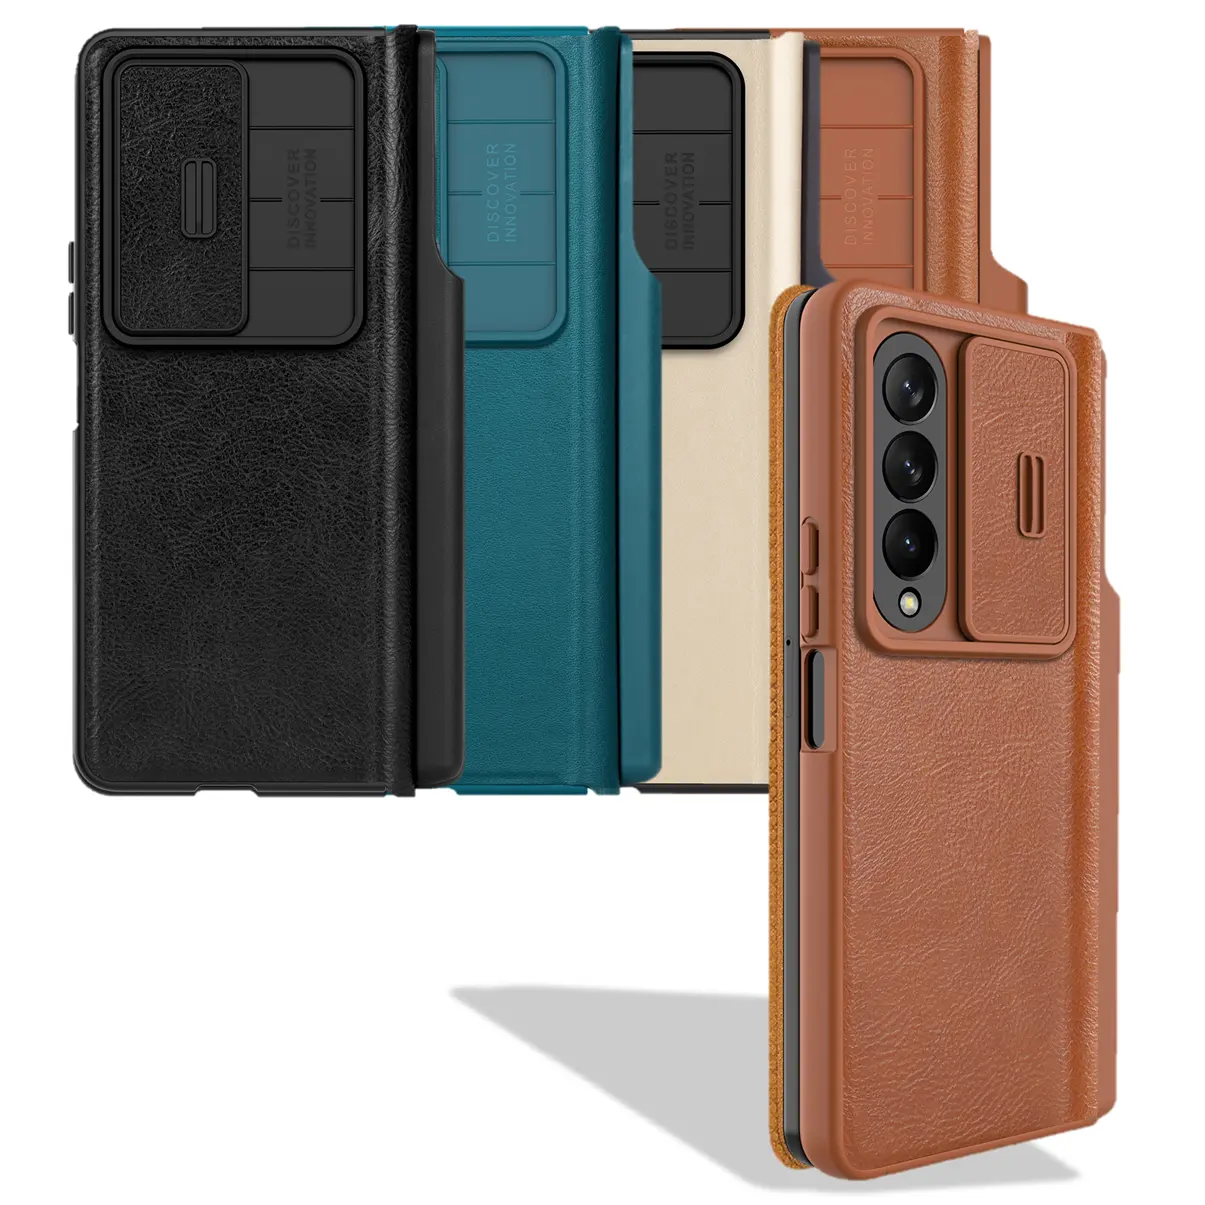 Nillkin phone case leather protective cover with camera protector and s pen holder shockproof flip cover for Samsung Z Fold 4/3